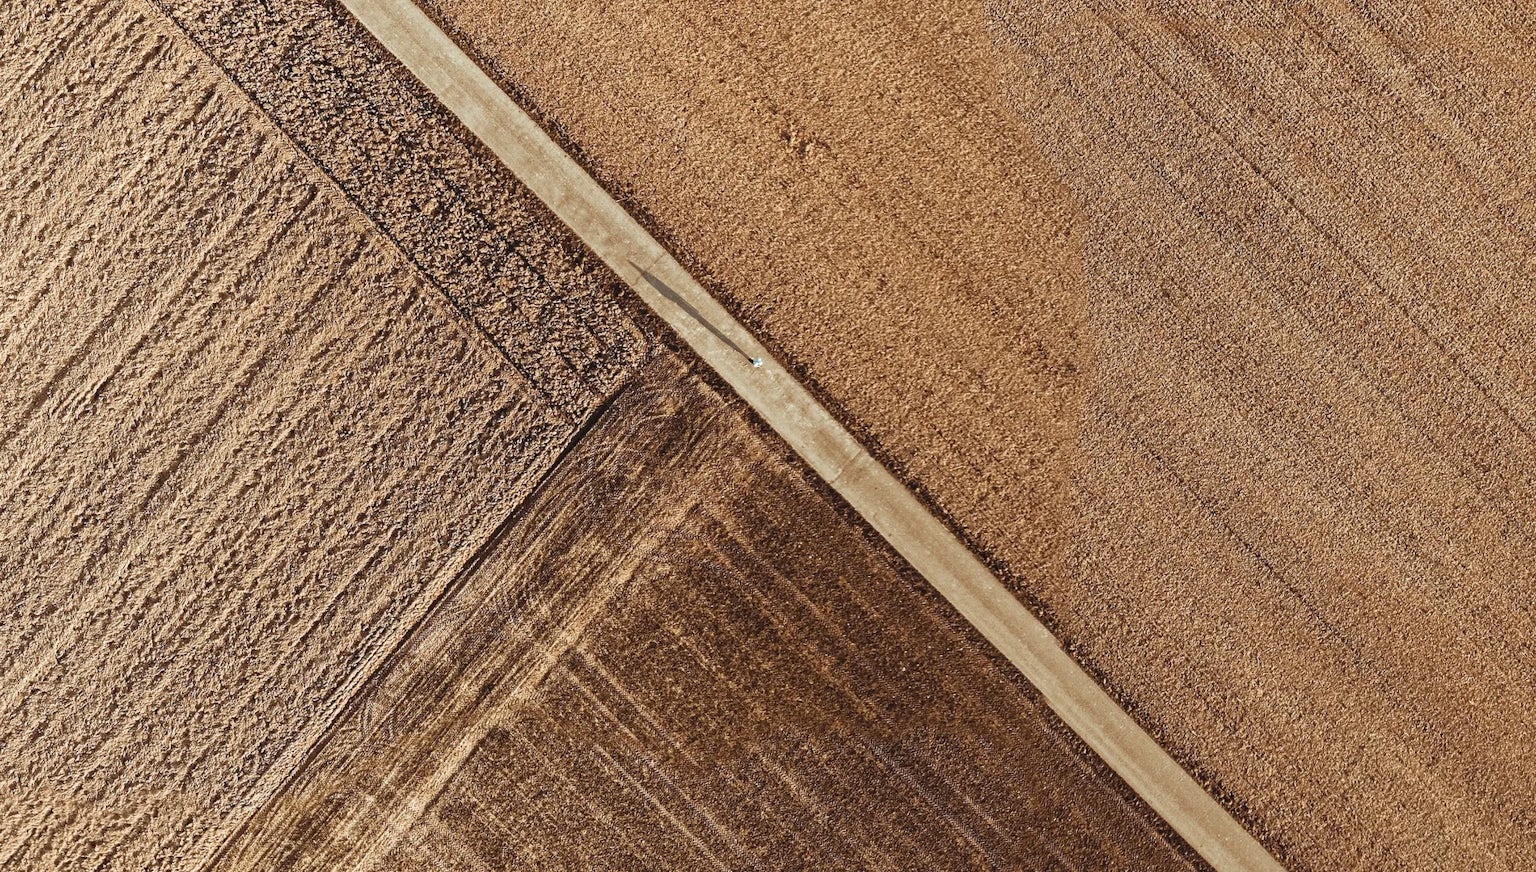 Wheat field from above